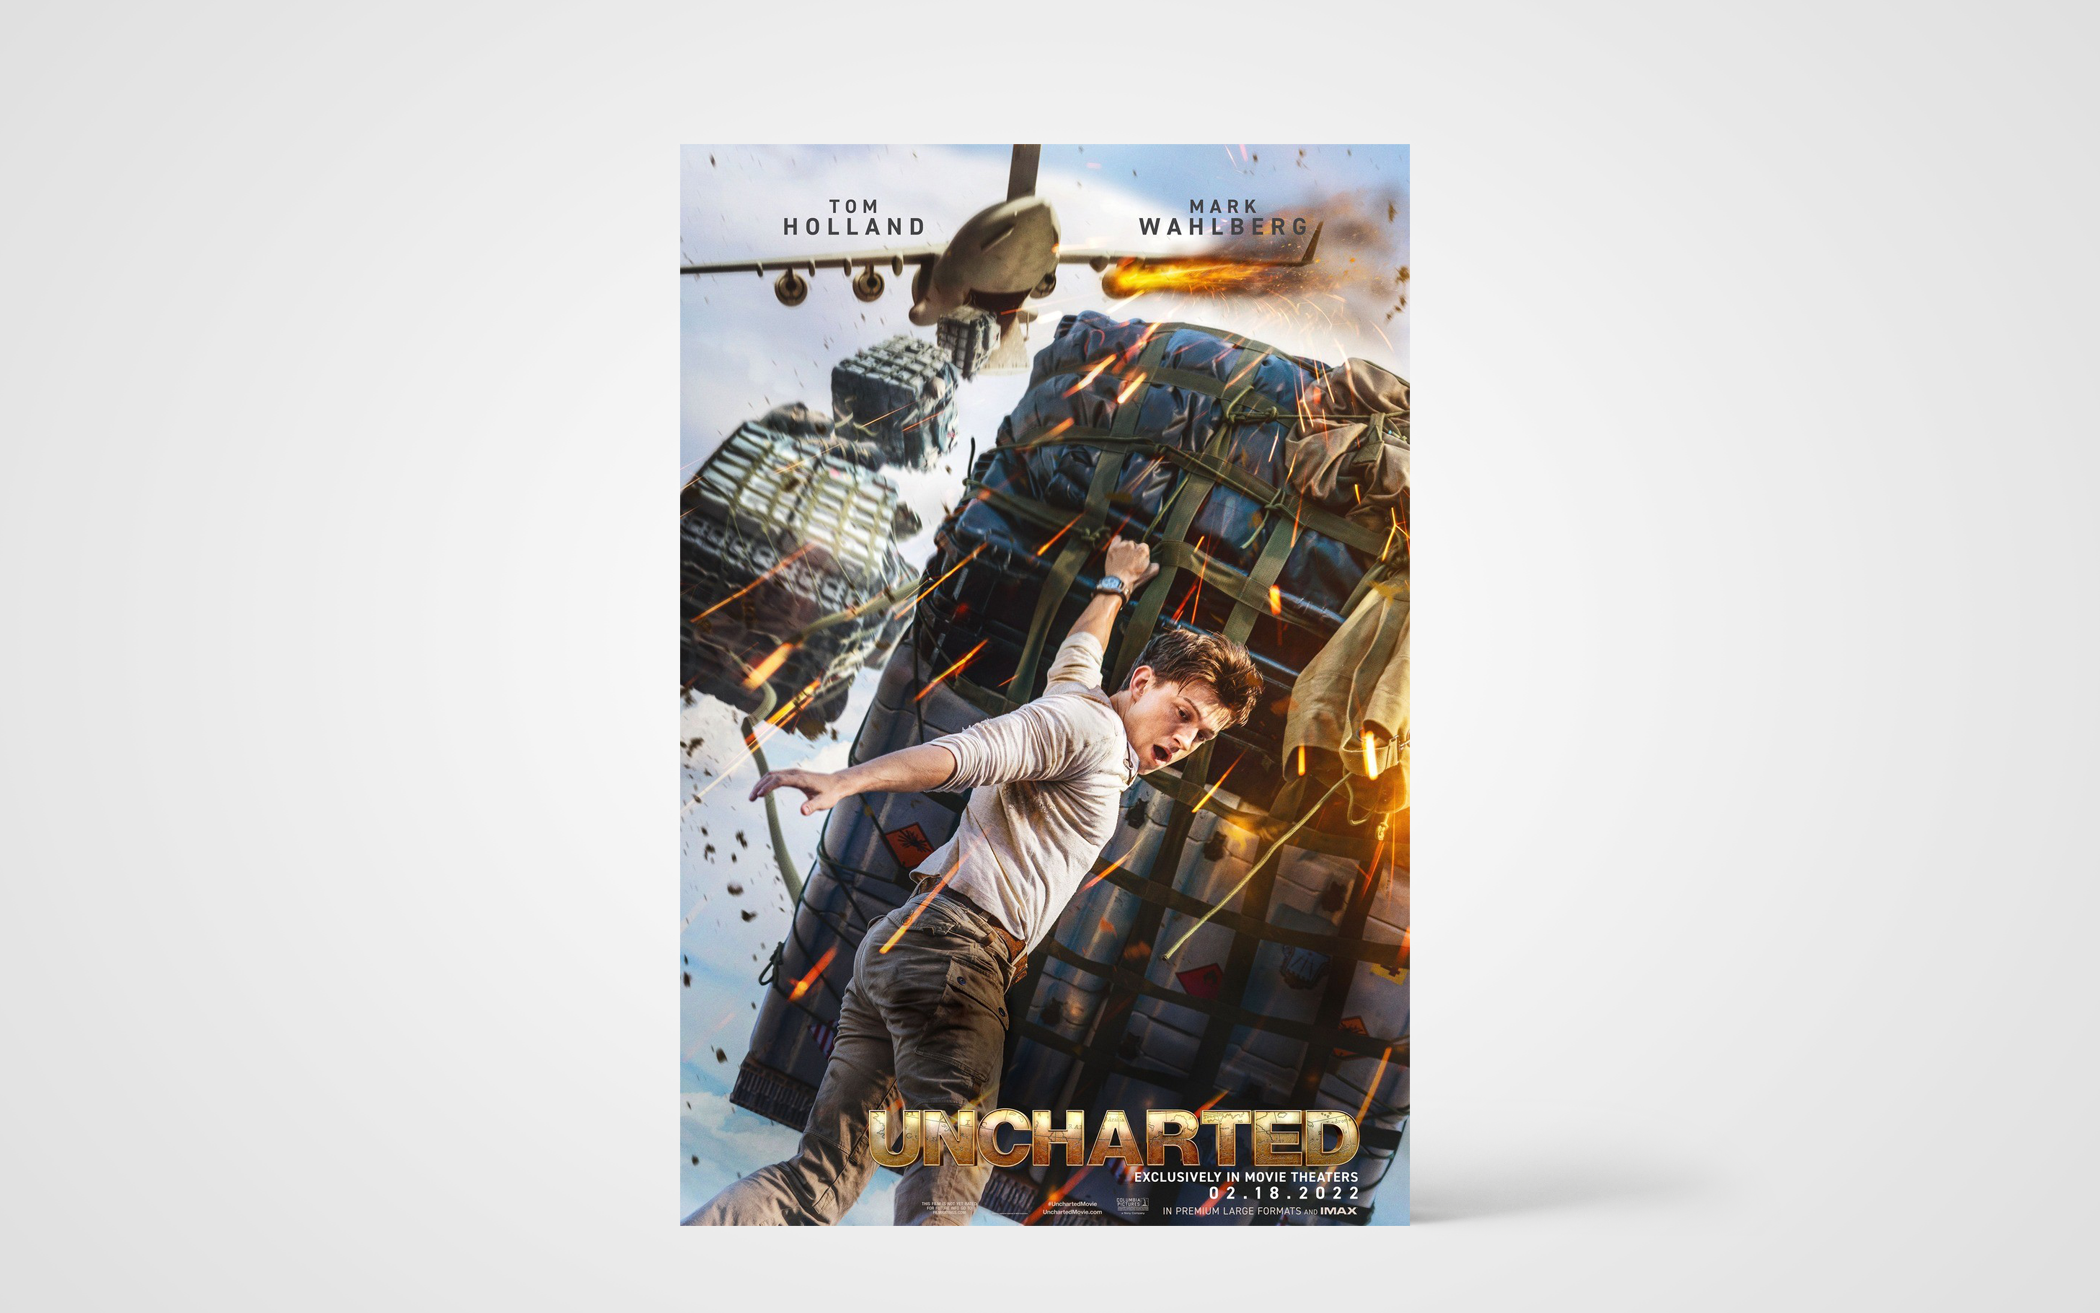 Uncharted (#6 of 8): Extra Large Movie Poster Image - IMP Awards